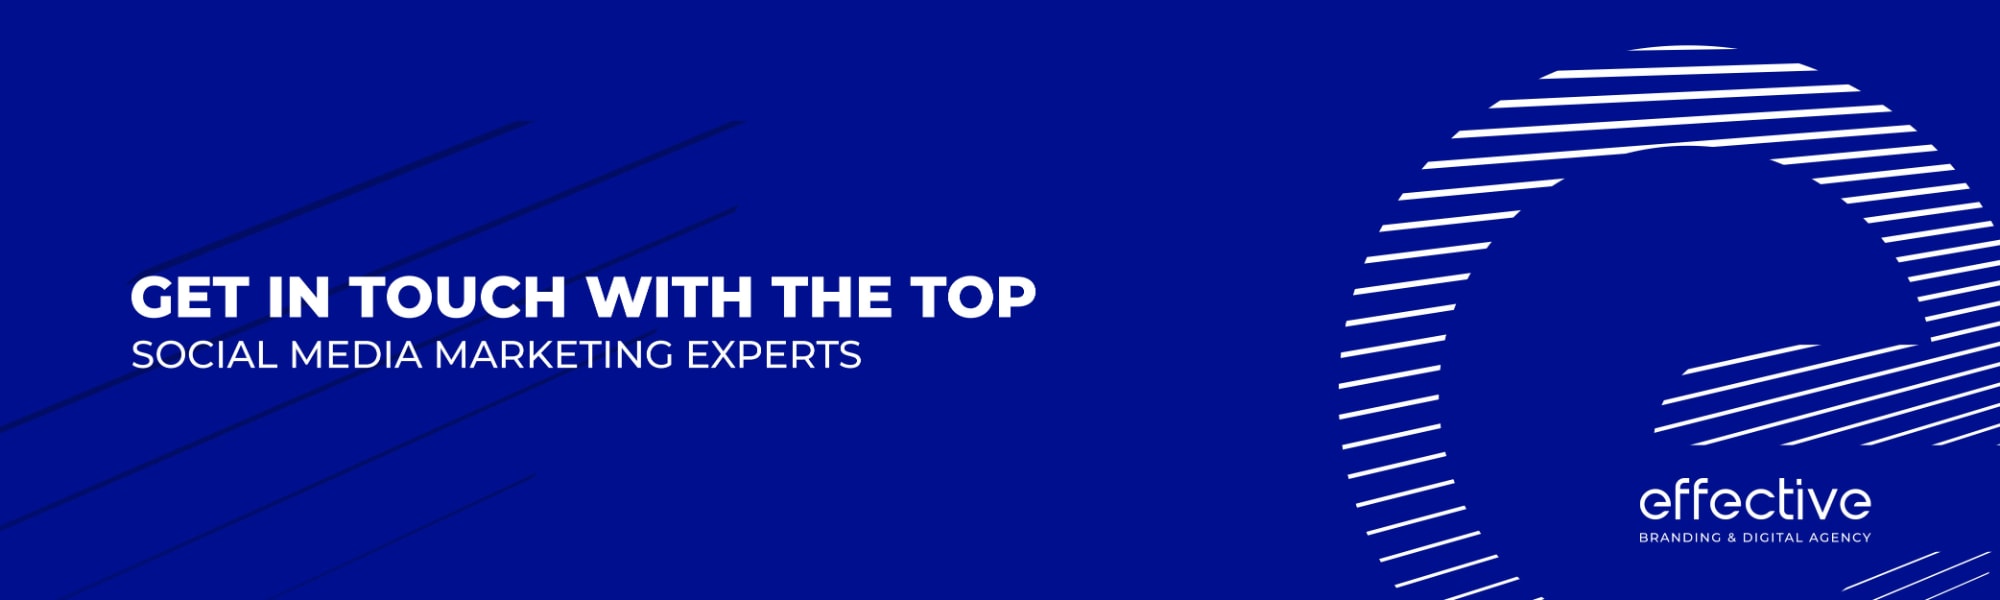 Get in Touch with the Top Social Media Marketing Experts